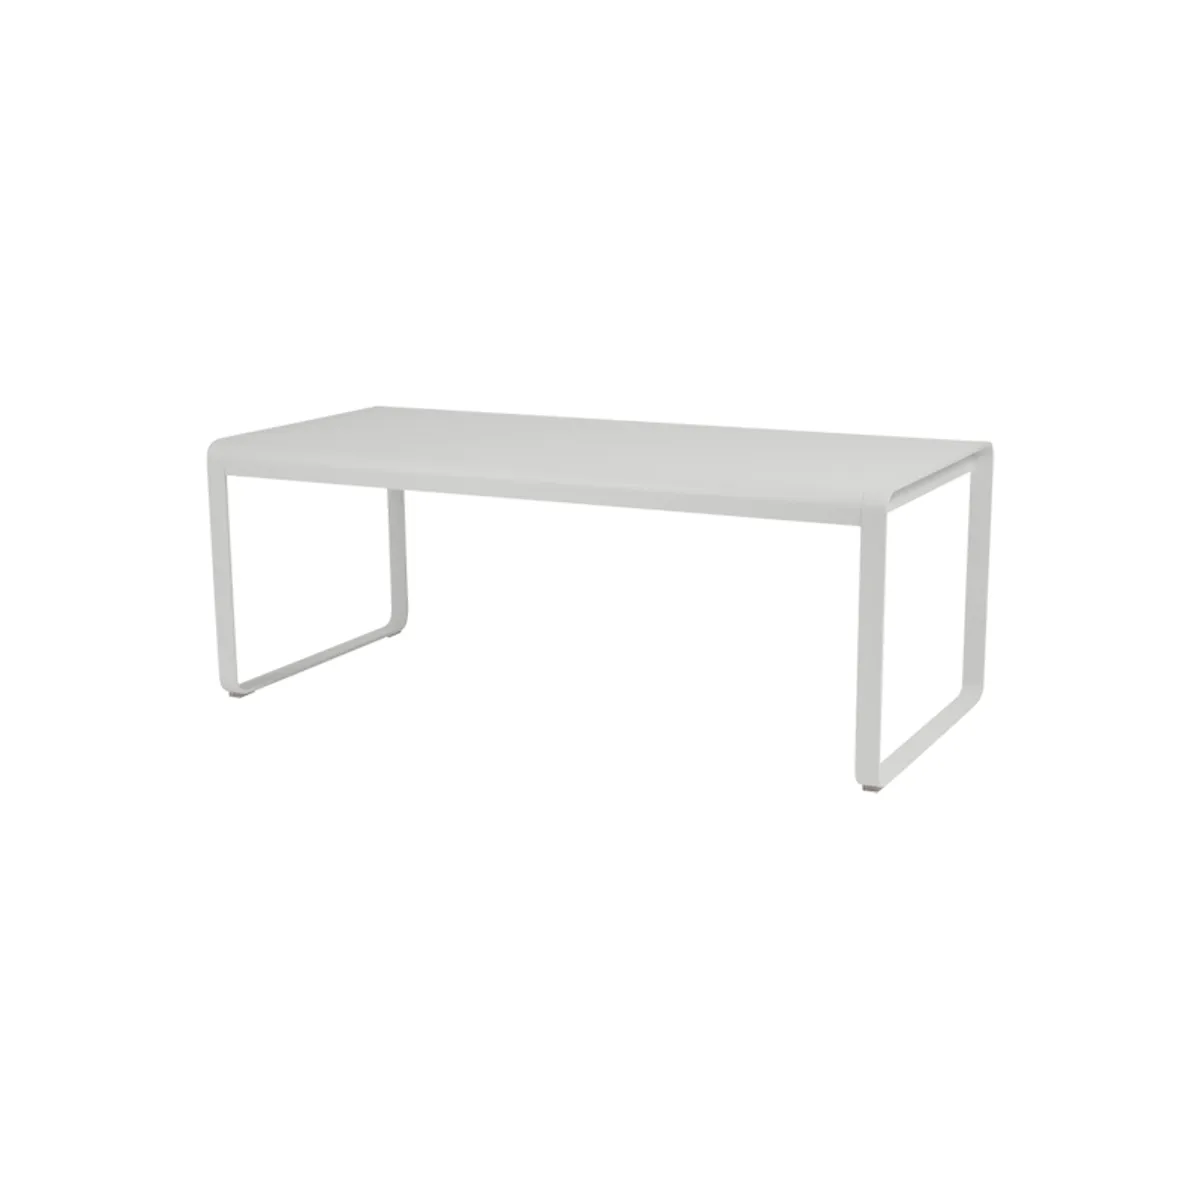 Bellevie Outdoor And Indoor Table Furniture For Cafes And Restaurants White